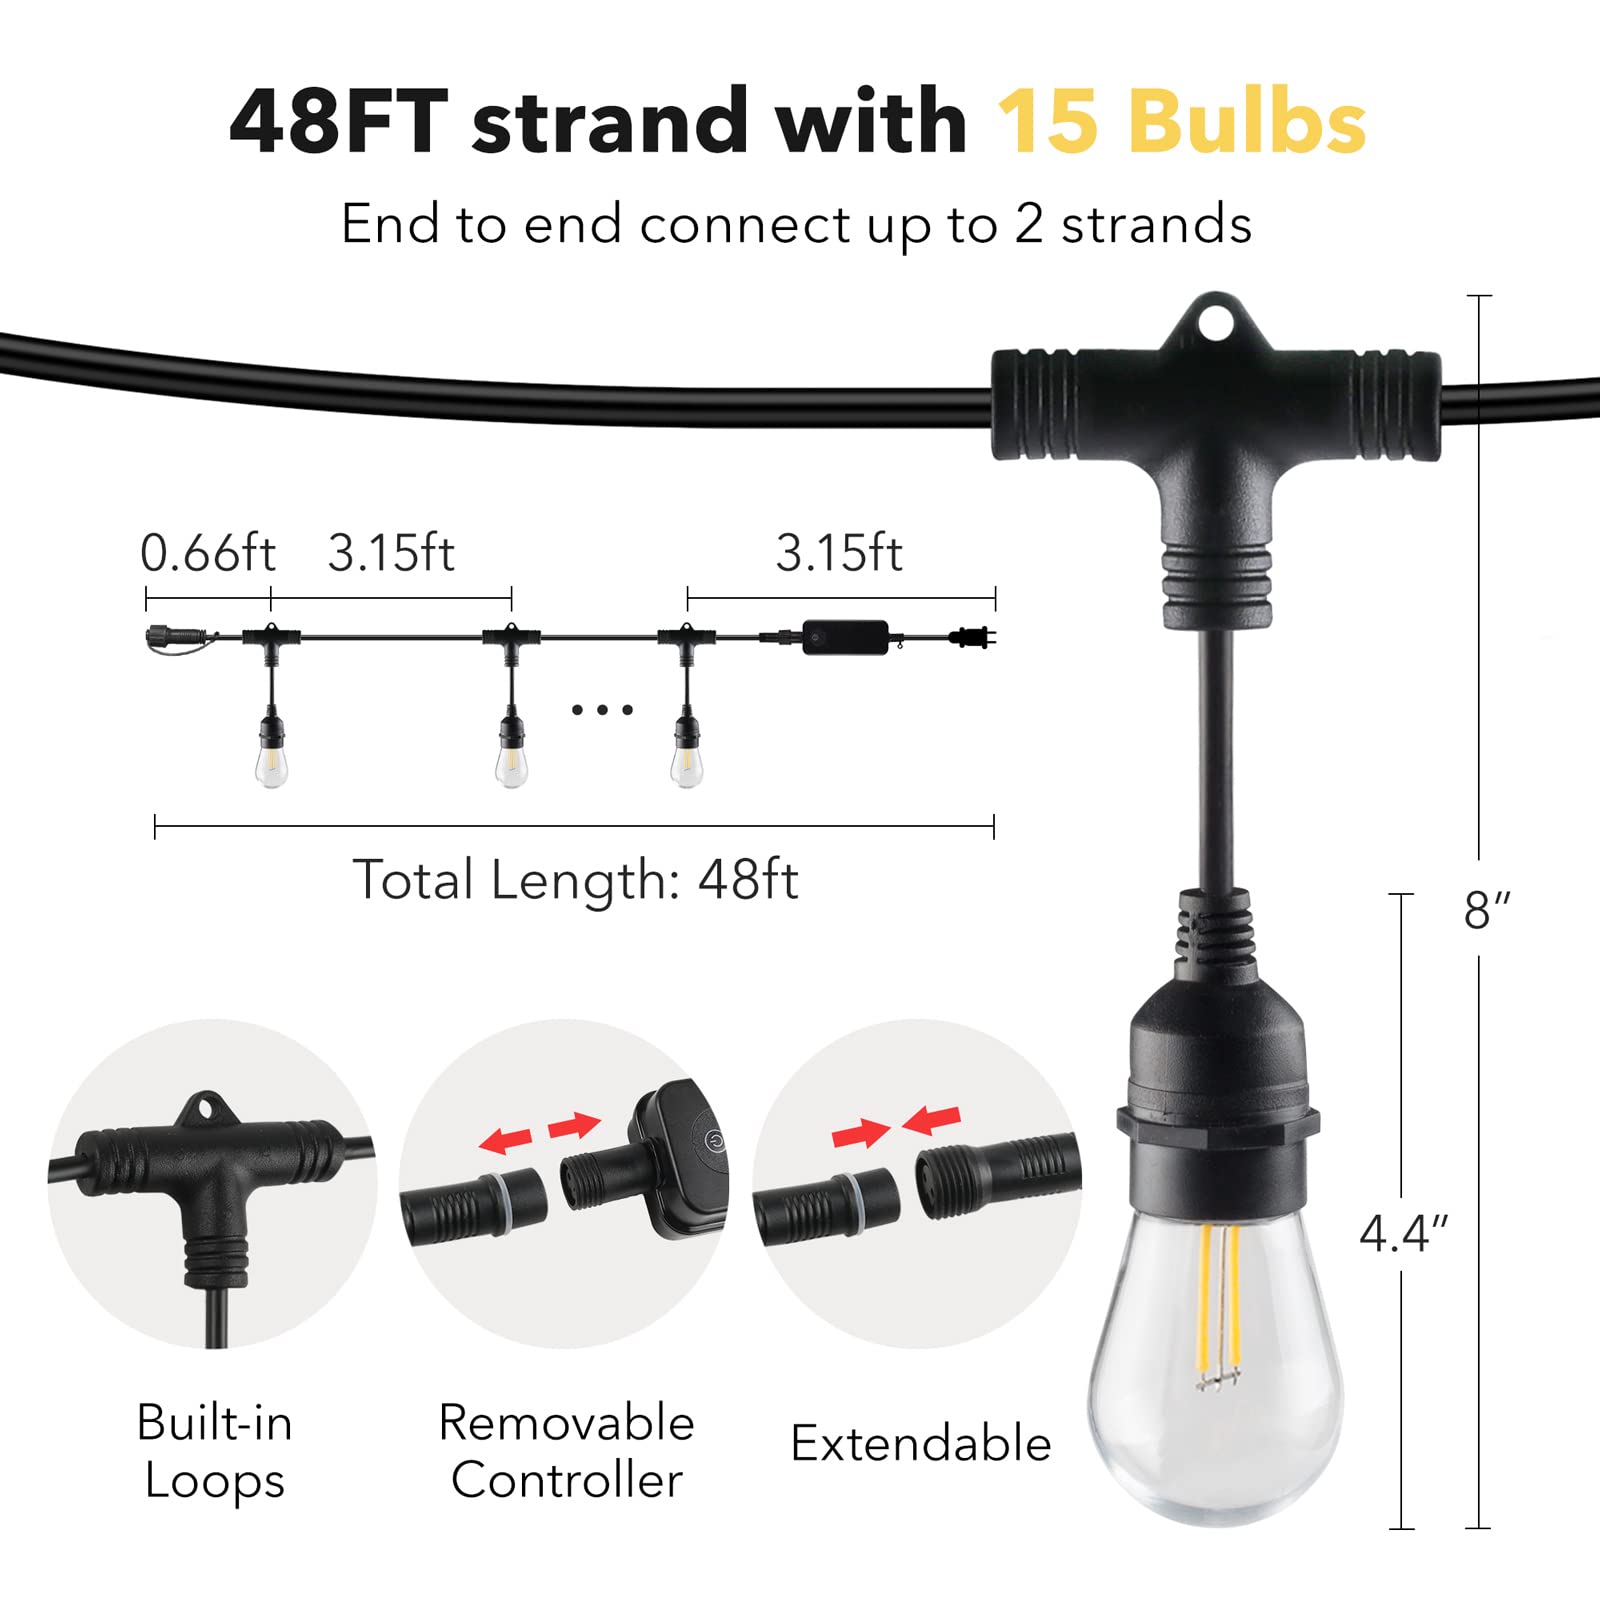 HBN 48ft Outdoor String Lights-Smart Outside String Lights-15 LED Bulbs Dimmable & Shatterproof, 2.4 GHz Wi-Fi & Bluetooth App Control, Works with Alexa/Google Assistant, IP65 Waterproof & Extendable